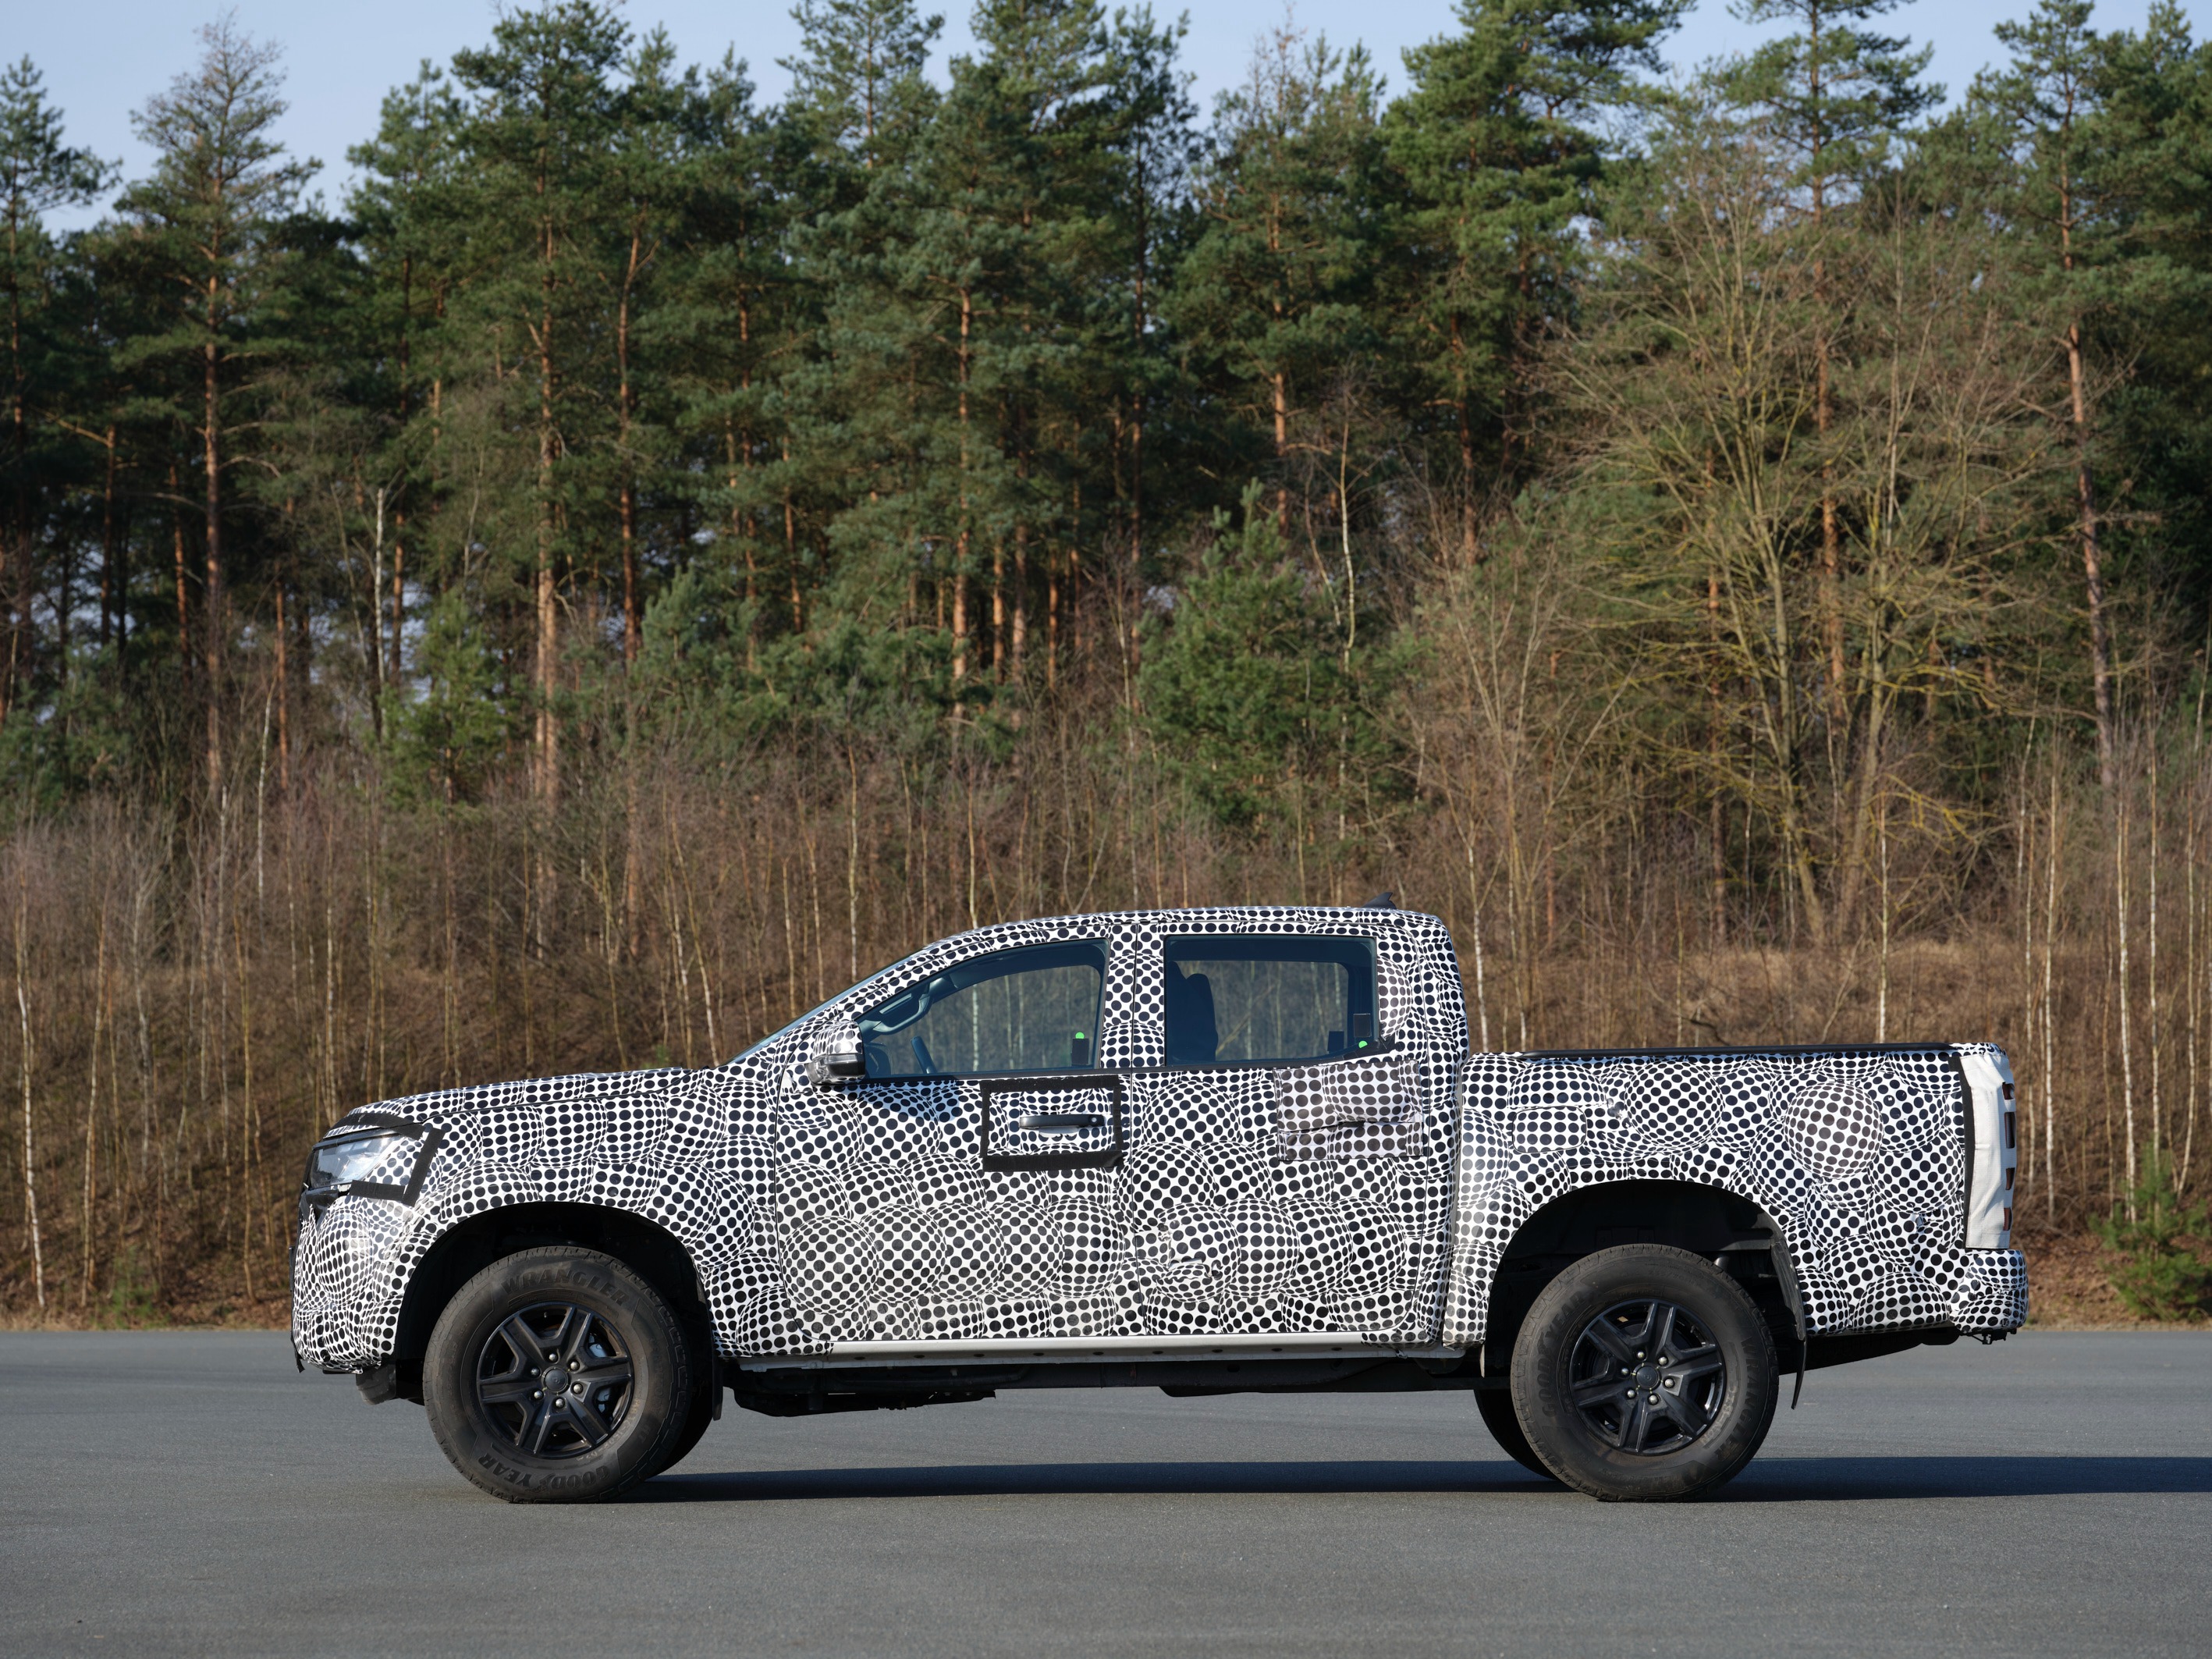 New images released of the next generation Amarok!